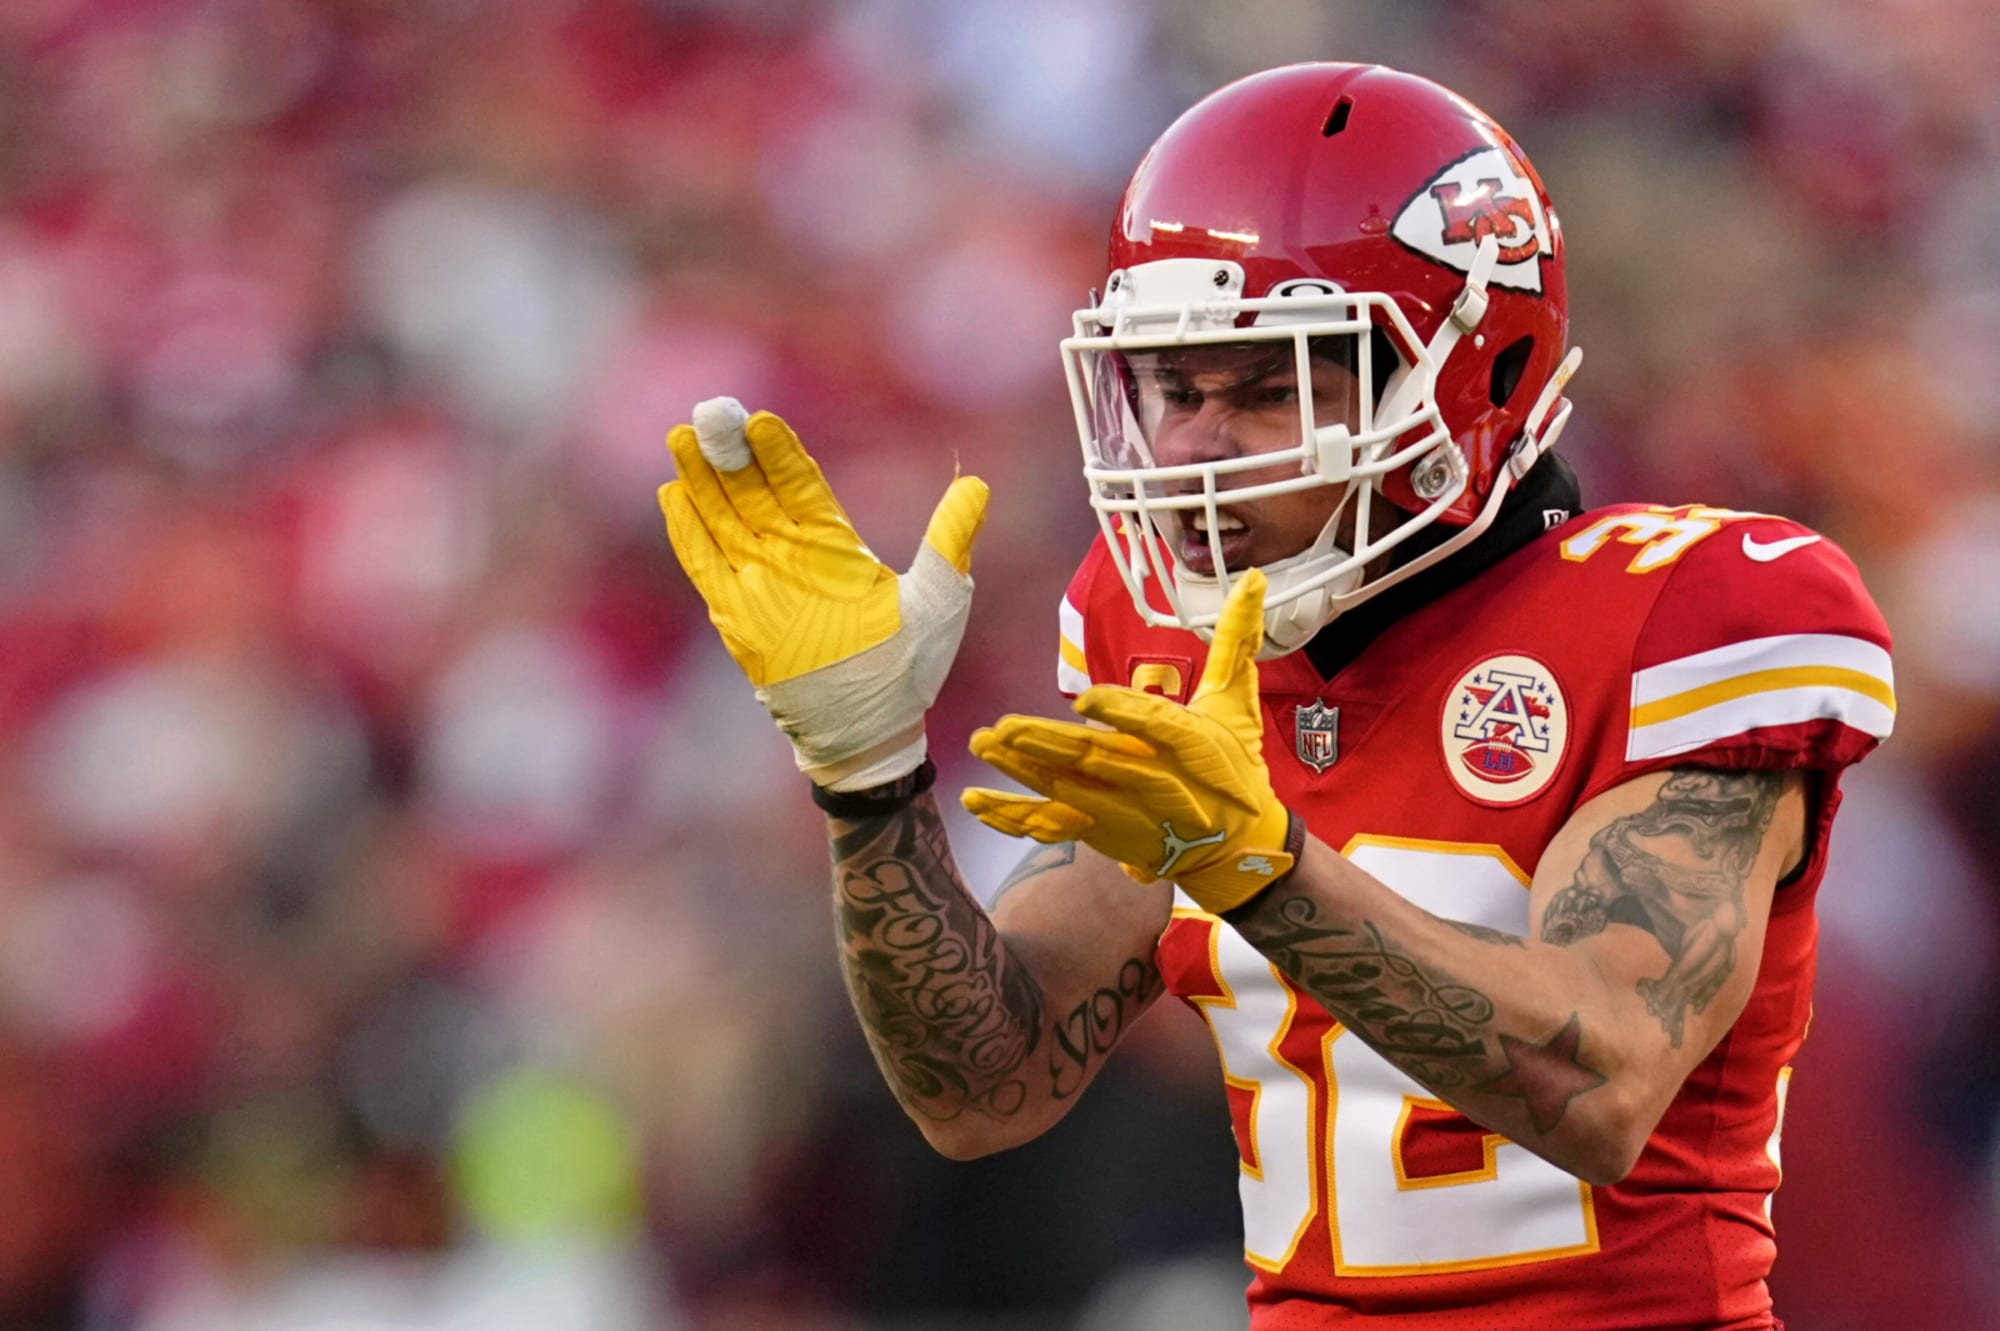 Tyrann Mathieu is ‘definitely motivated’ by end of Chiefs career